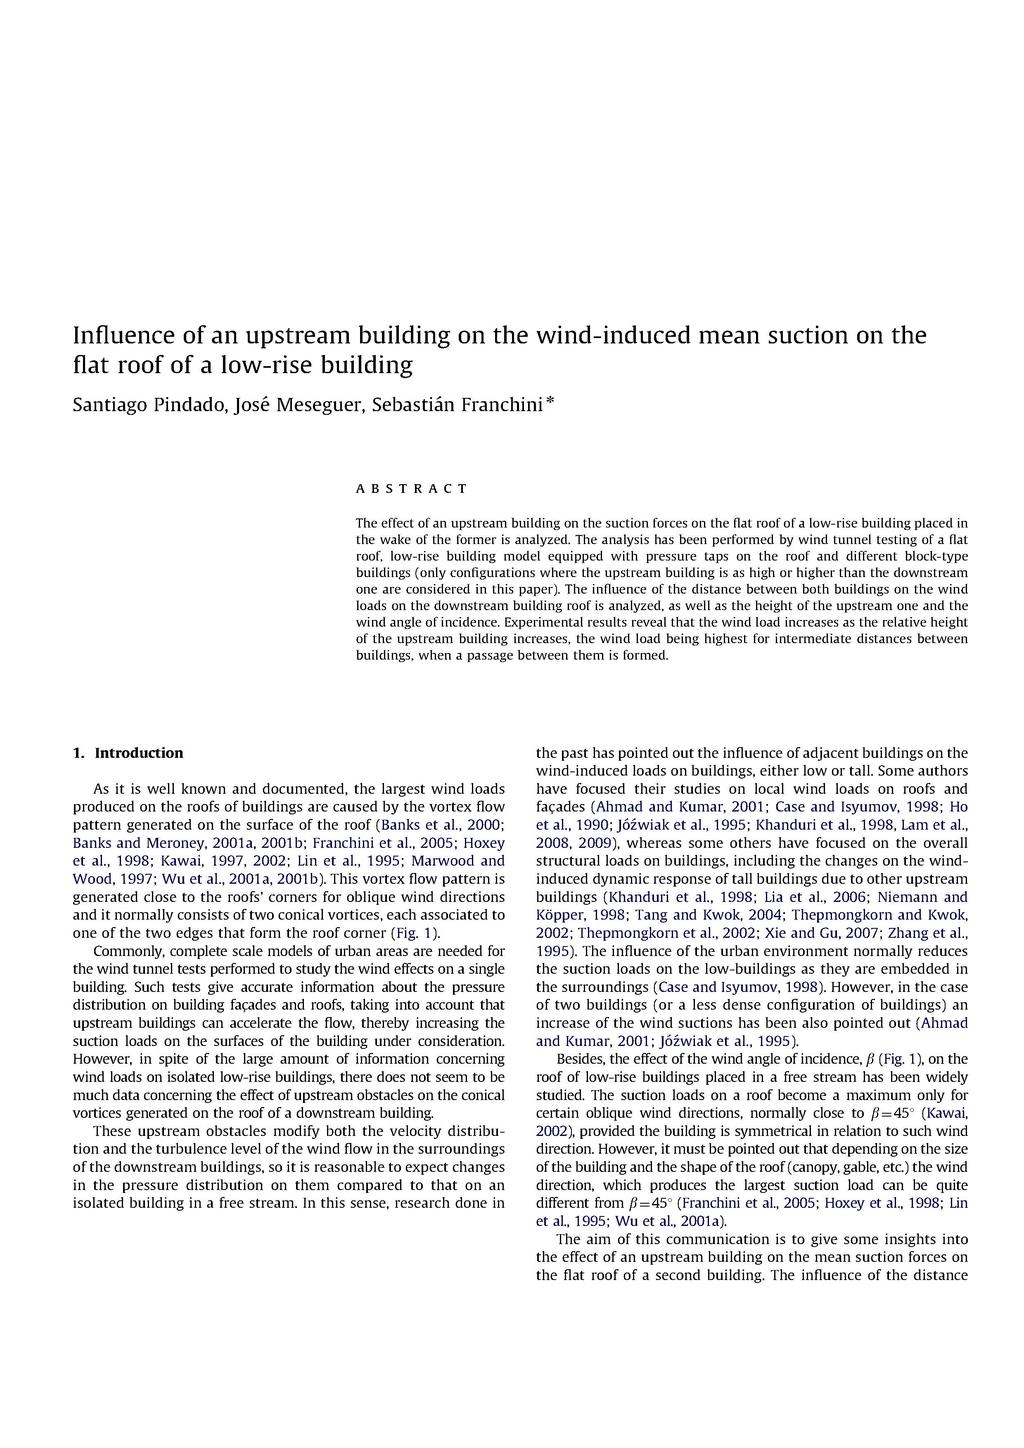 Influence of an upstream building on the wind-induced mean suction on the flat roof of a low-rise building Santiago Pindado, Jose Meseguer, Sebastian Franchini* ABSTRACT The effect of an upstream